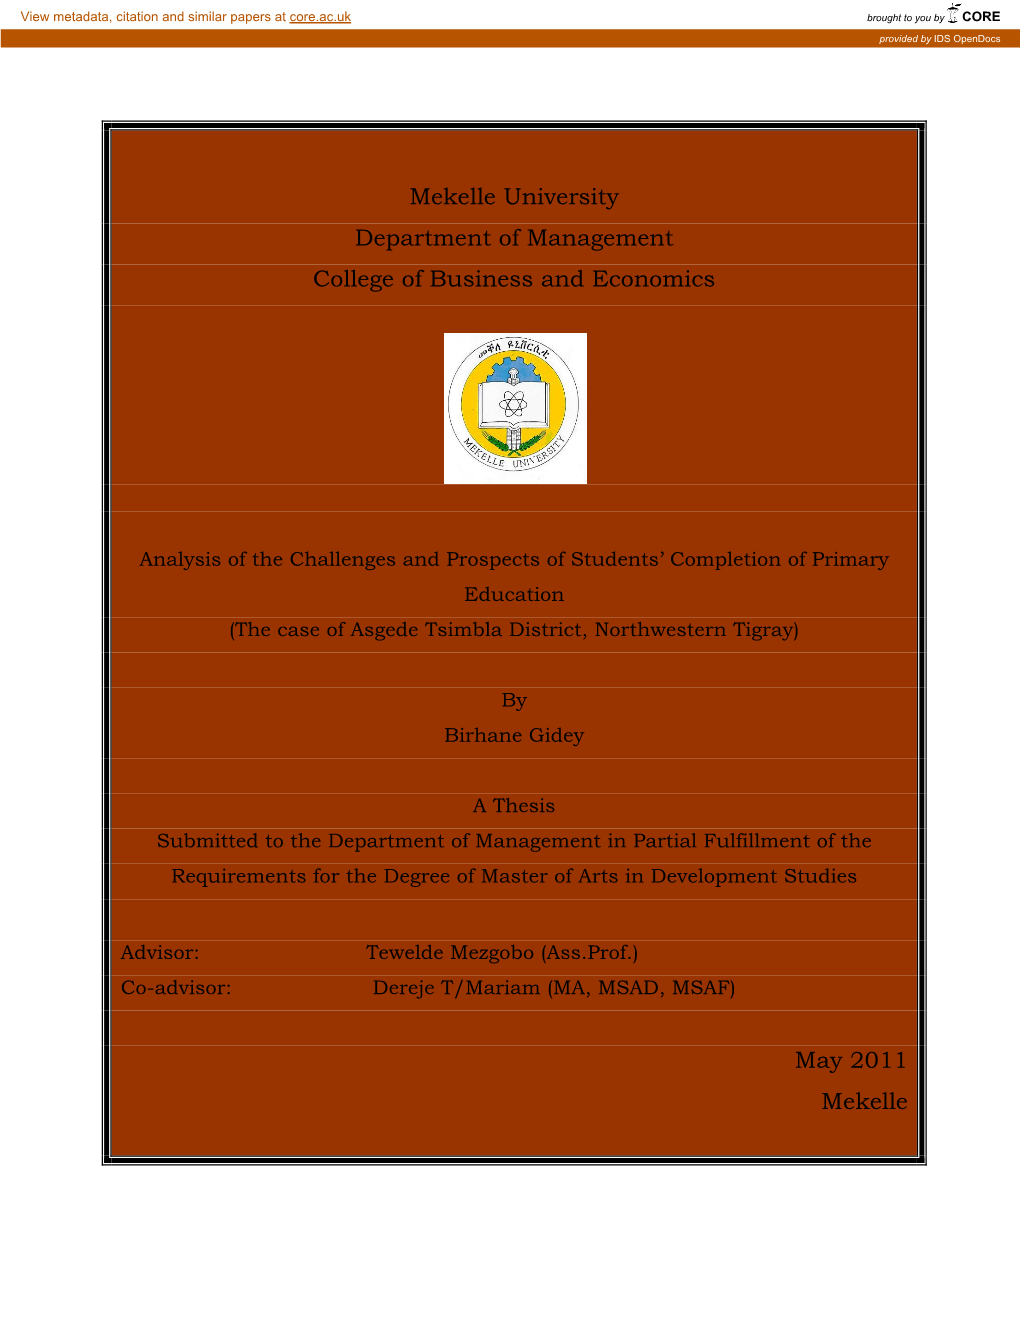 Mekelle University Department of Management College of Business and Economics